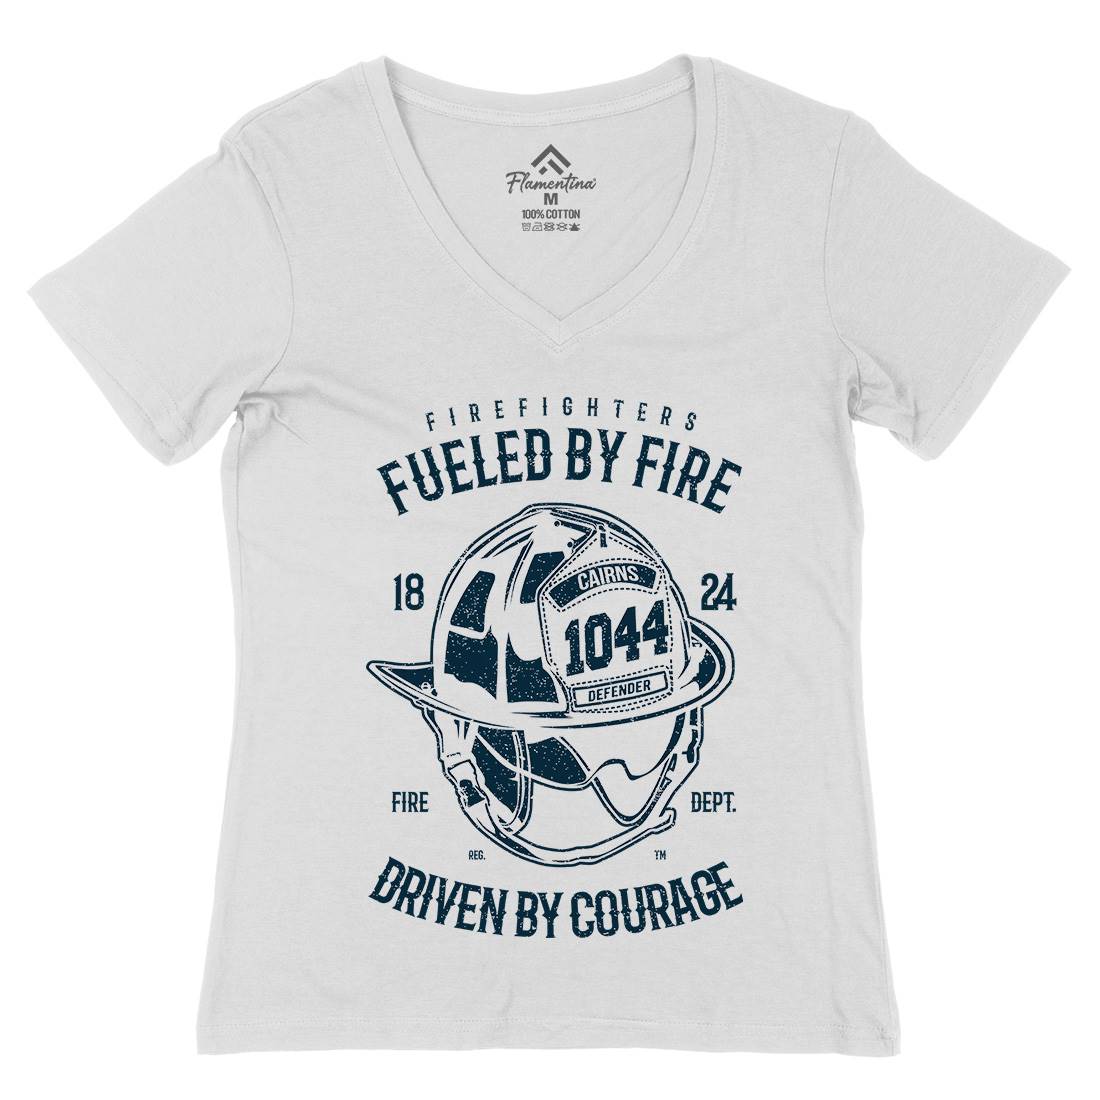 Fuelled By Fire Womens Organic V-Neck T-Shirt Firefighters A667